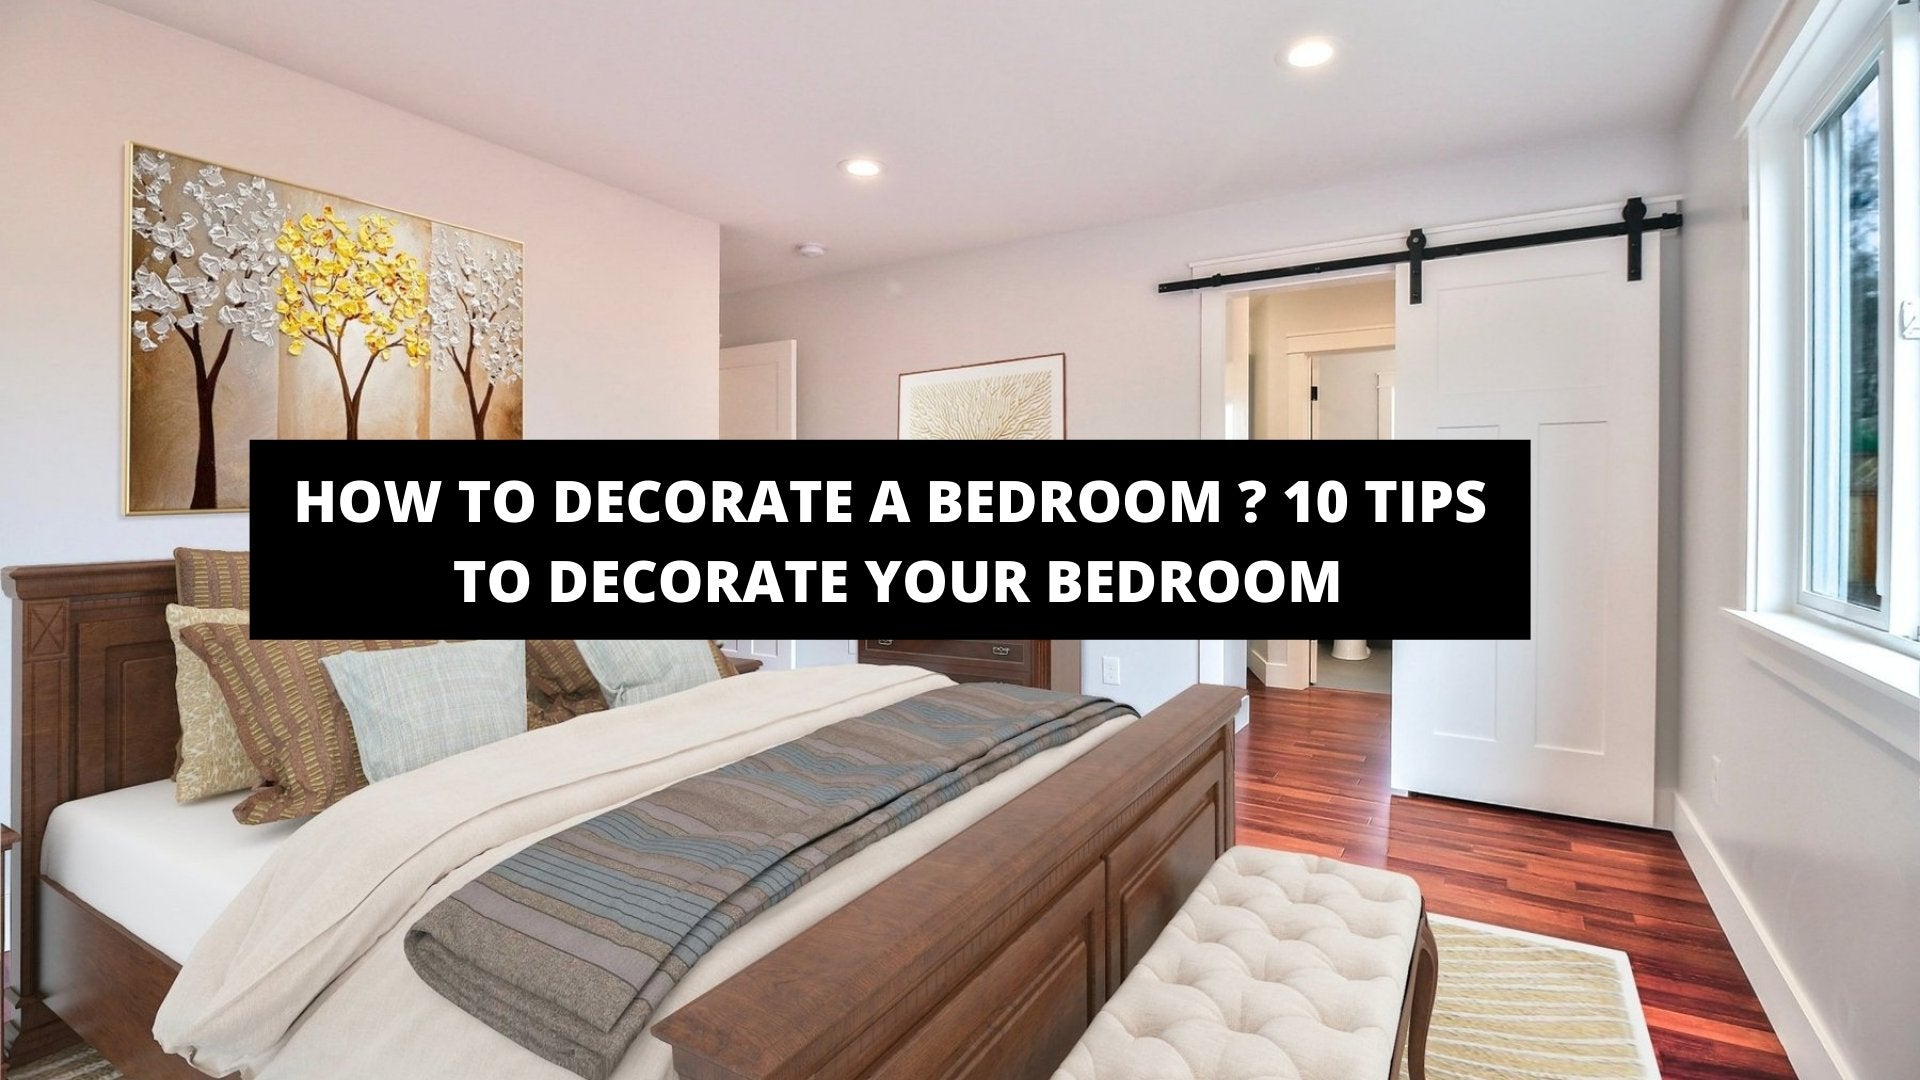 How To Decorate A Bedroom ? 10 Tips To Decorate Your Bedroom - The Trendy Art